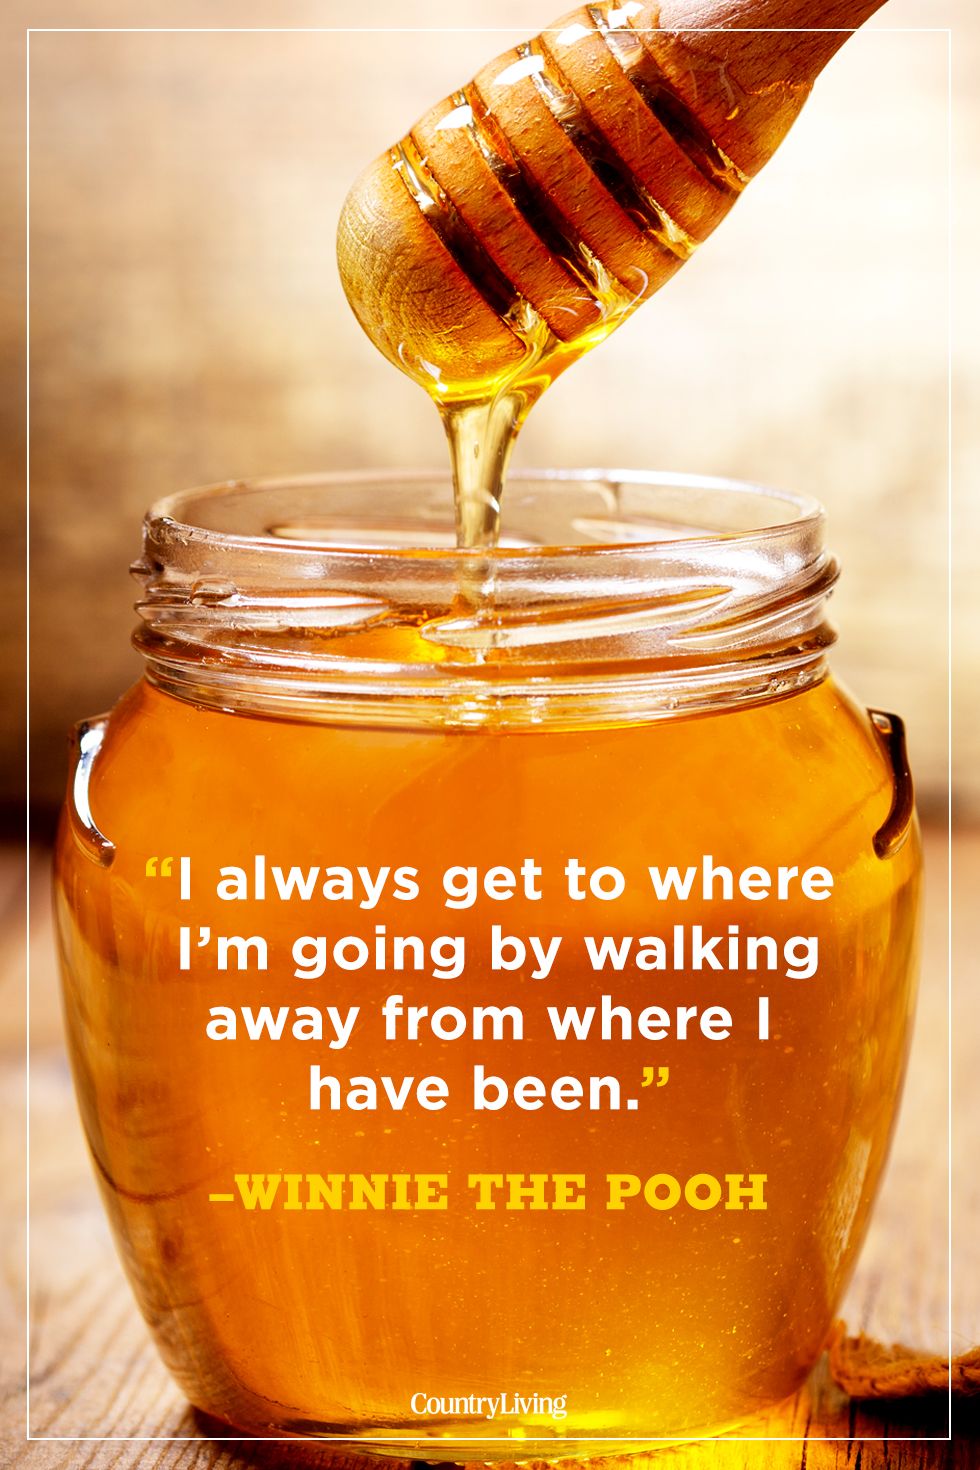 winnie-the-pooh-quotes-20-1533159701.jpg